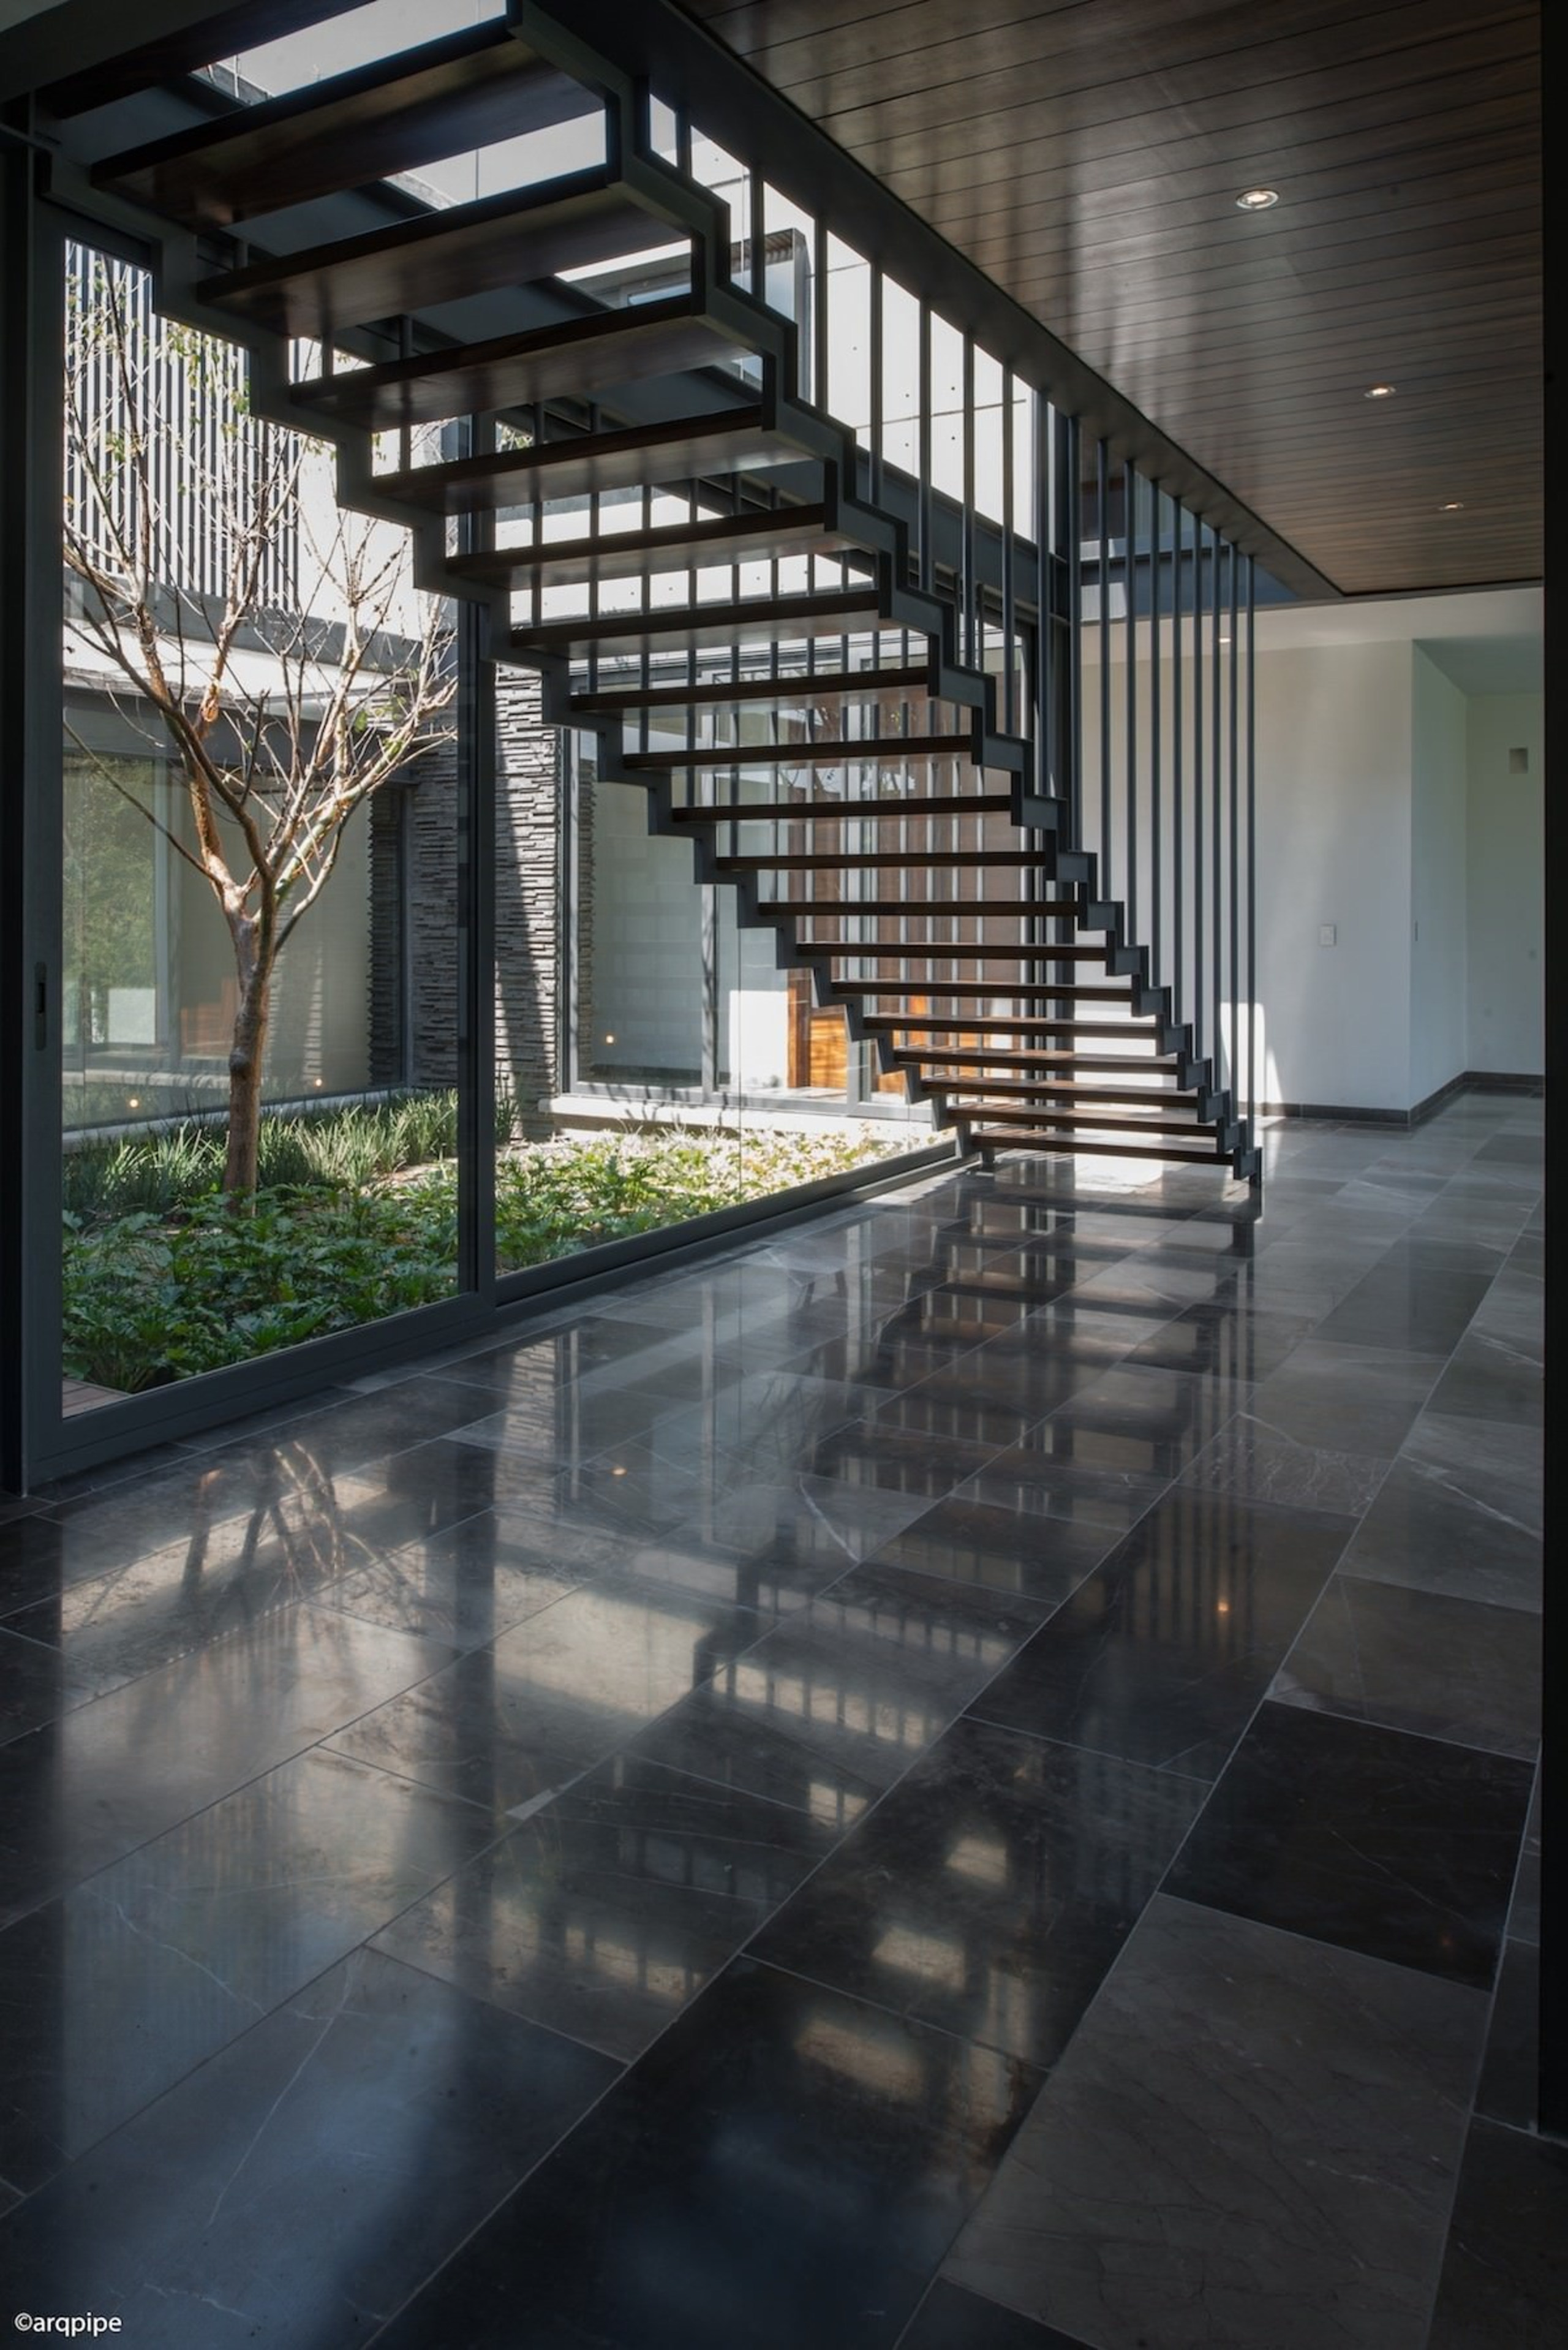 Colima home/Di Frenna Arquitectos - Colima home/Di Frenna architecture, building, daylighting, floor, glass, handrail, house, interior design, reflection, stairs, black, gray